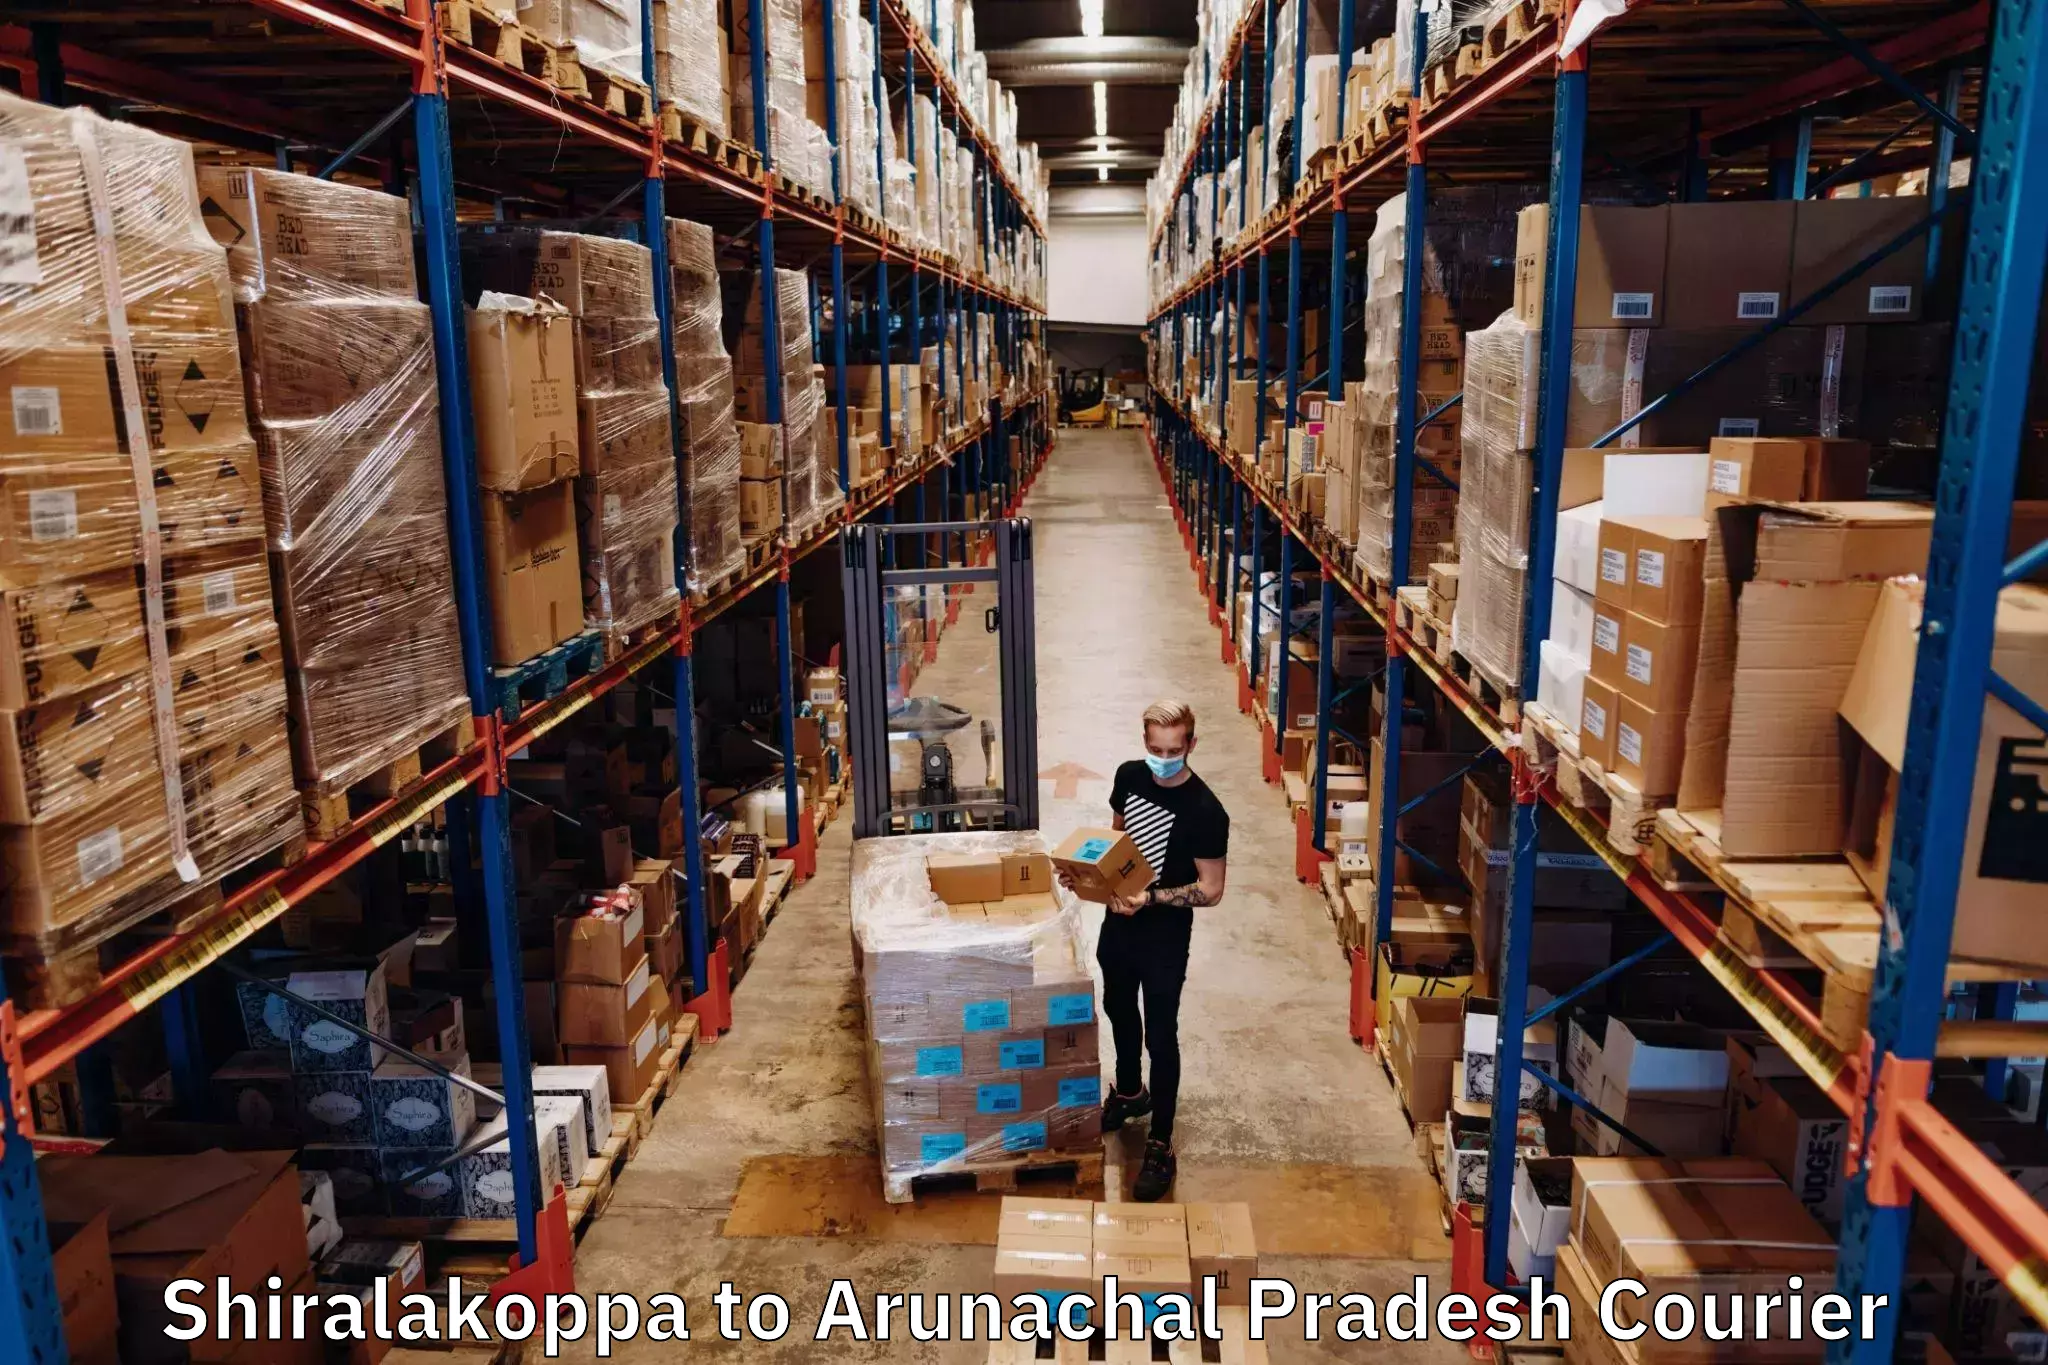 International courier networks Shiralakoppa to Aalo